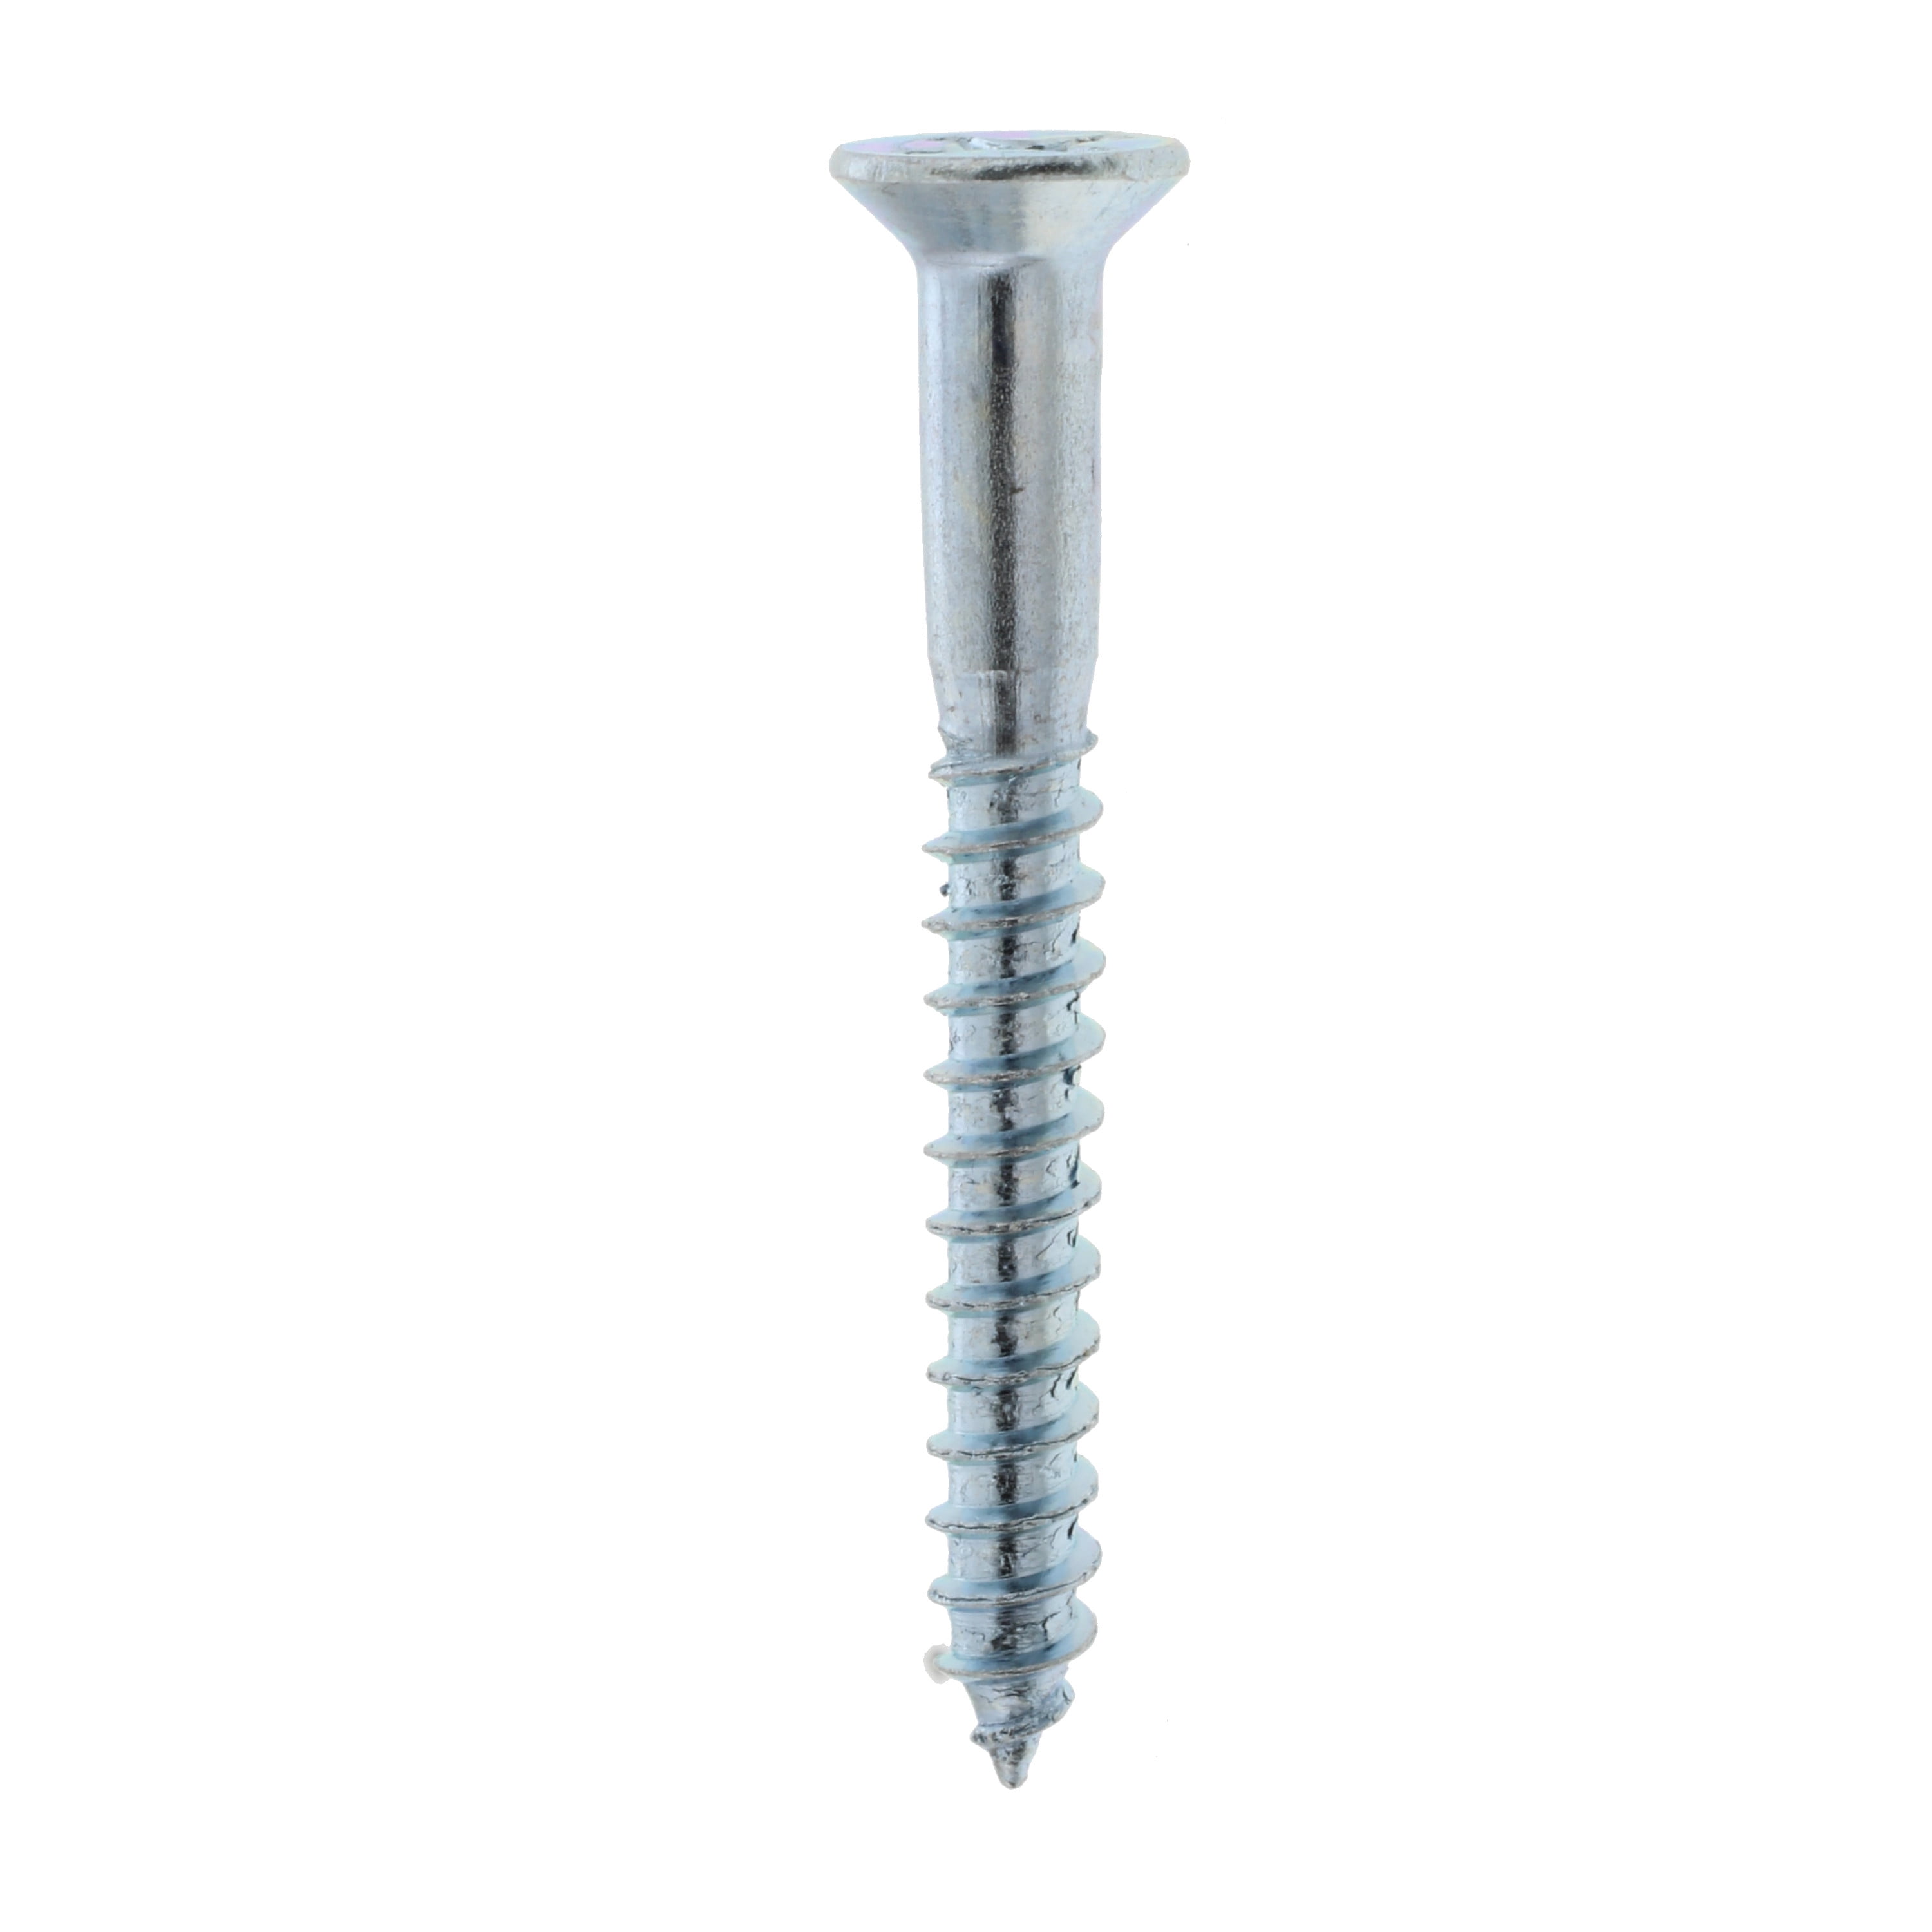 Pozi twinthread wood screws countersunk ZP # 8 x 1 3/4 inch pack size 48 